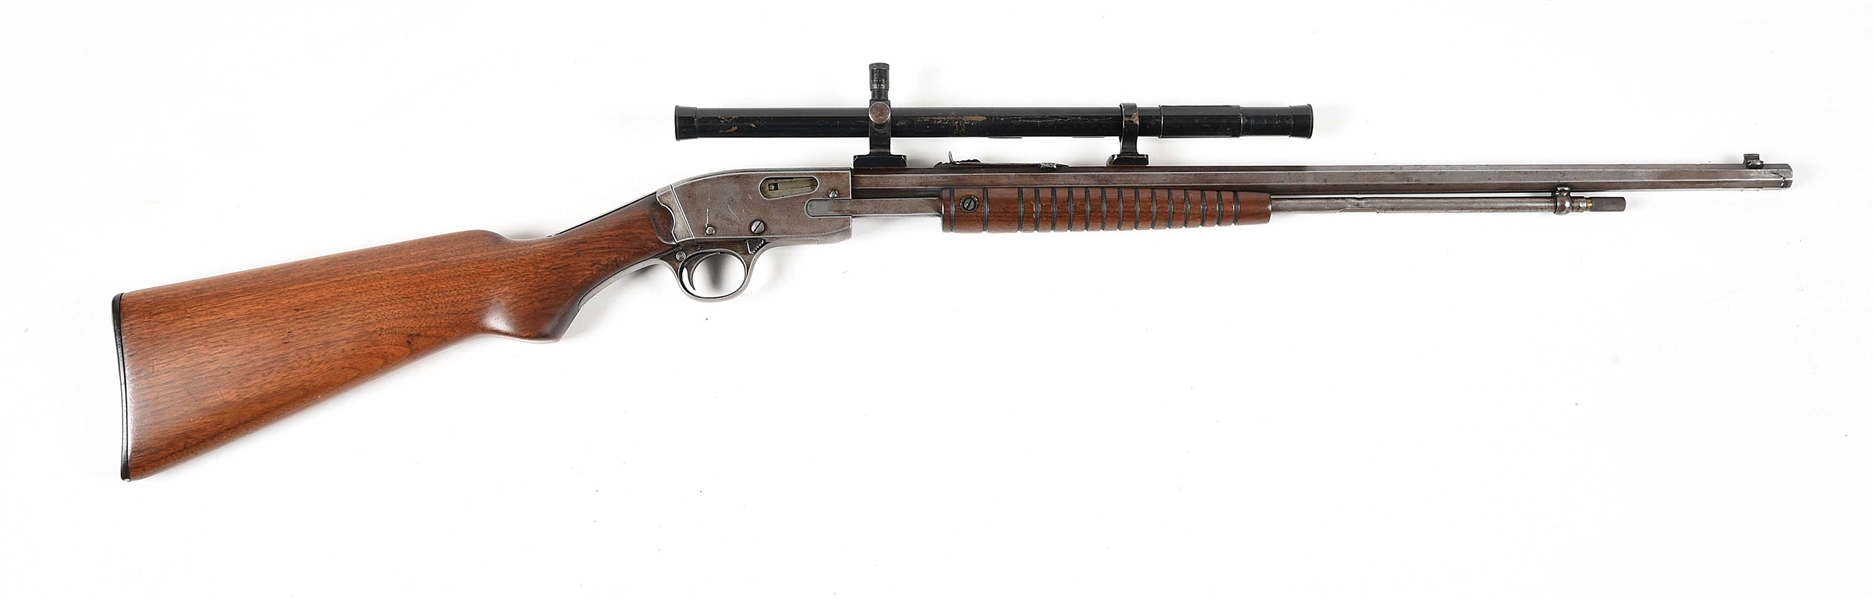 (C) SAVAGE MODEL 29 SLIDE ACTION RIFLE WITH PERIOD SCOPE.